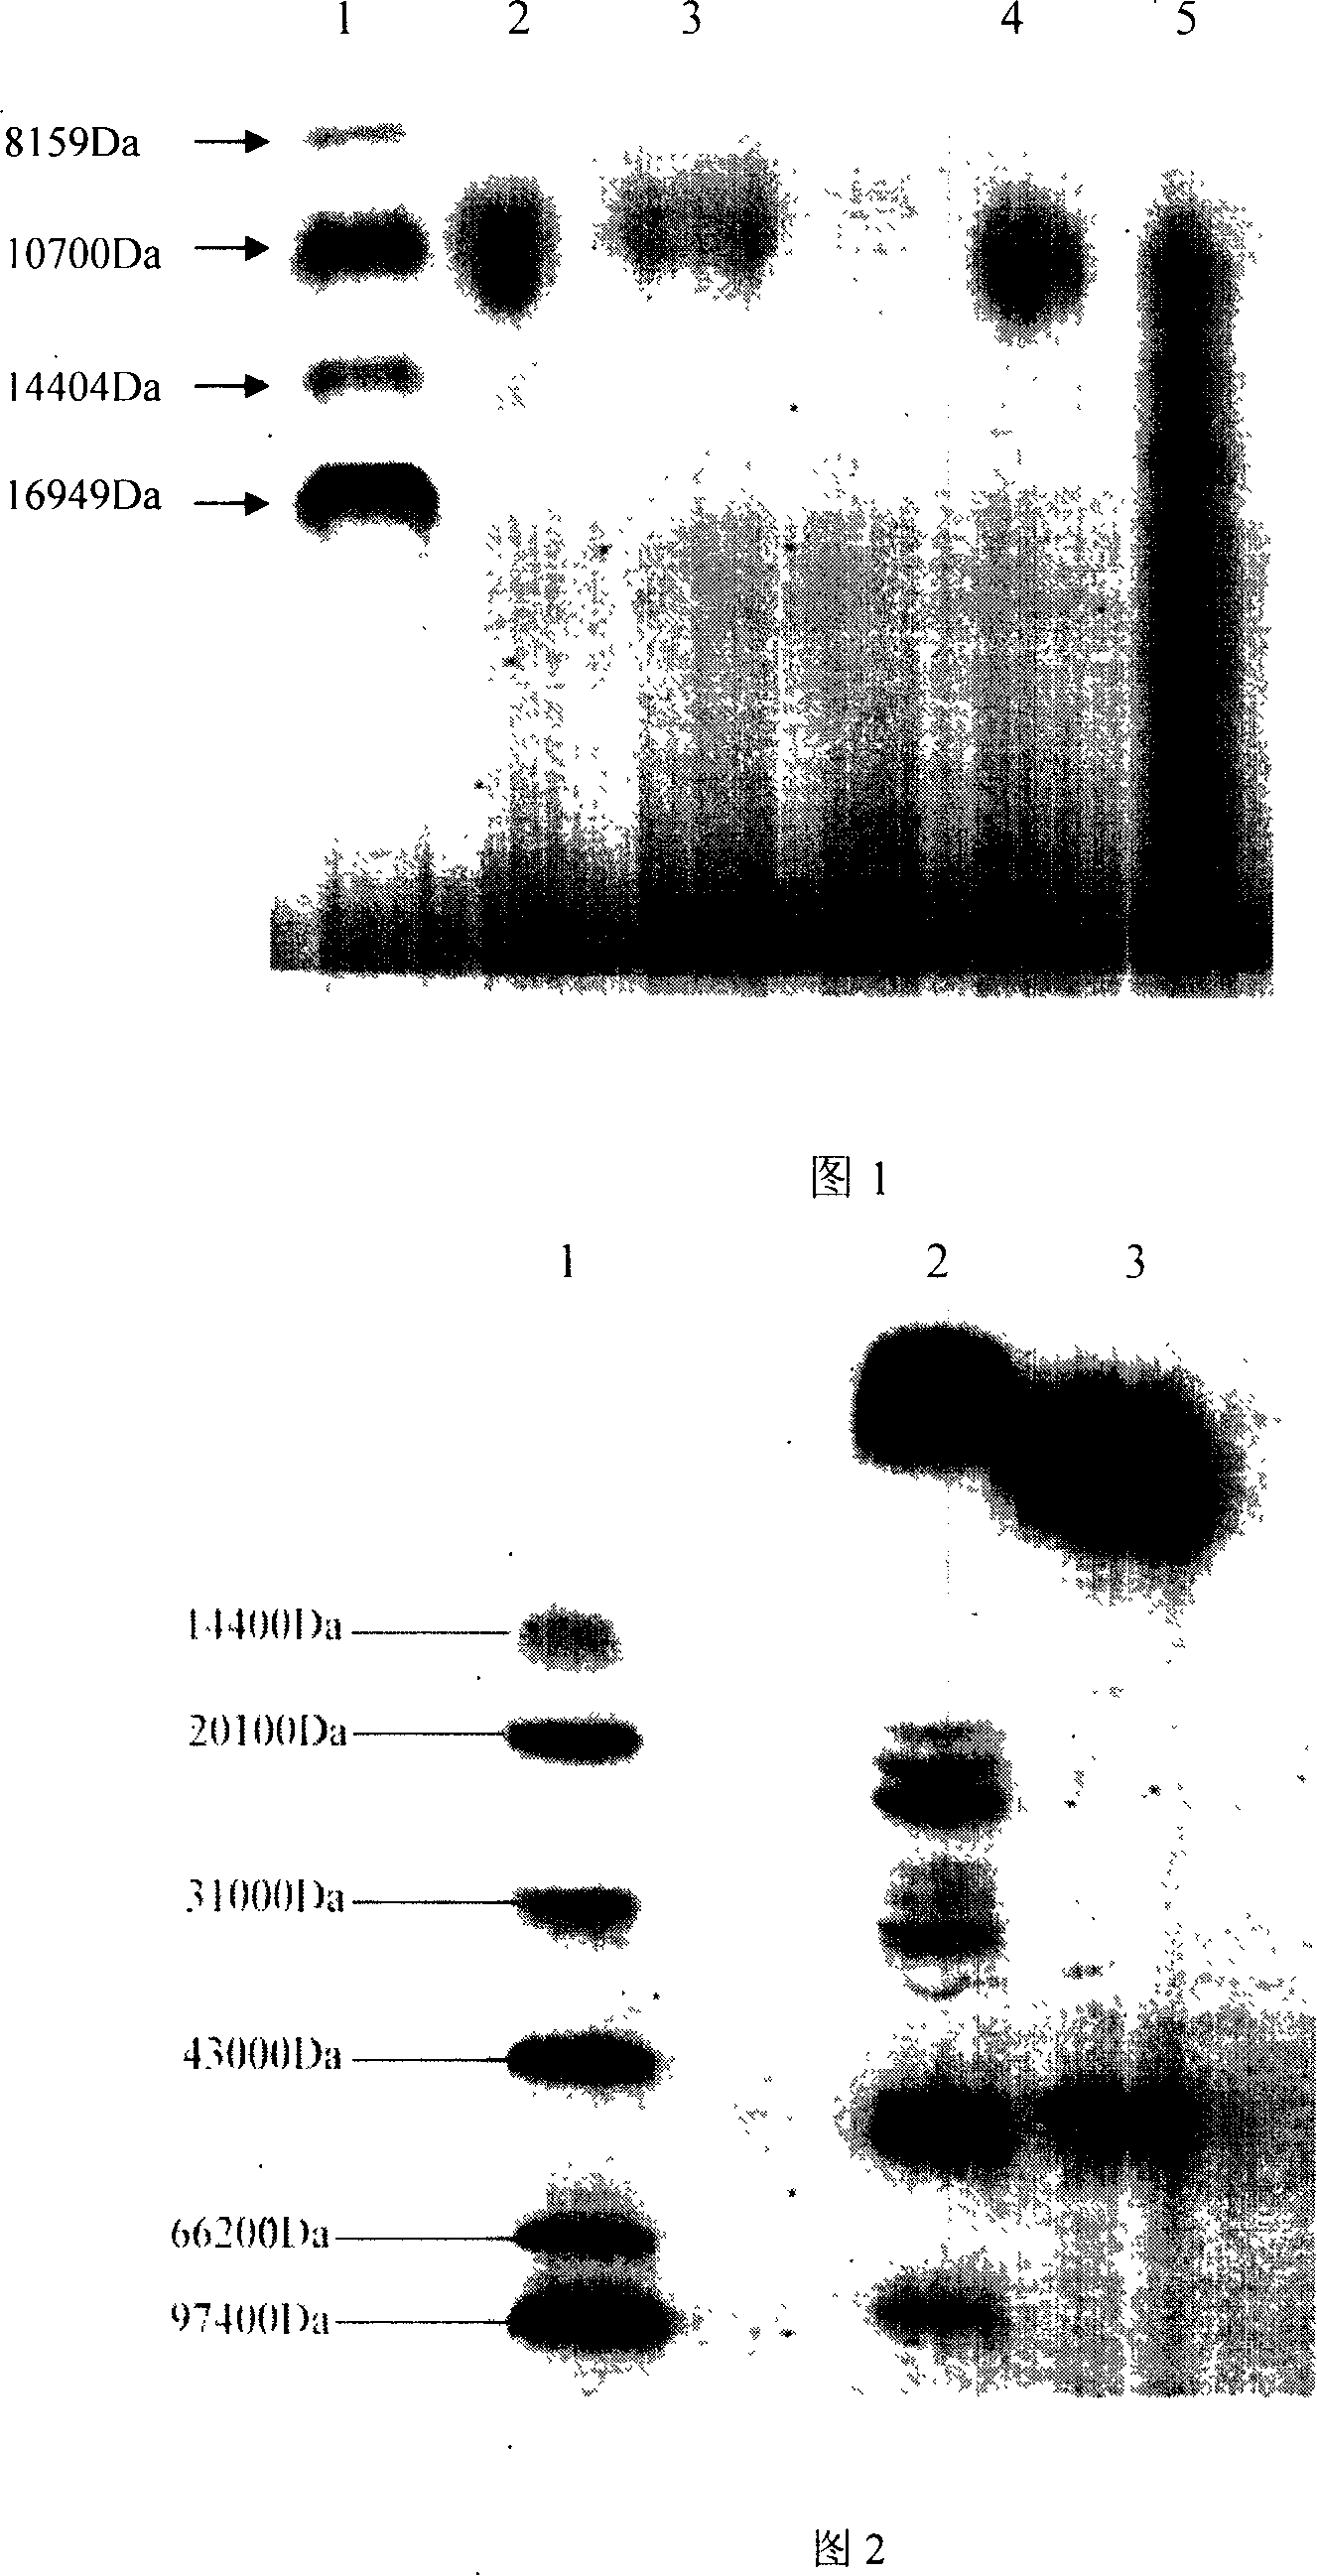 Method for the preservation of biological activity of activity polypeptides agent which is made from plants and is took orally for reducing blood suger